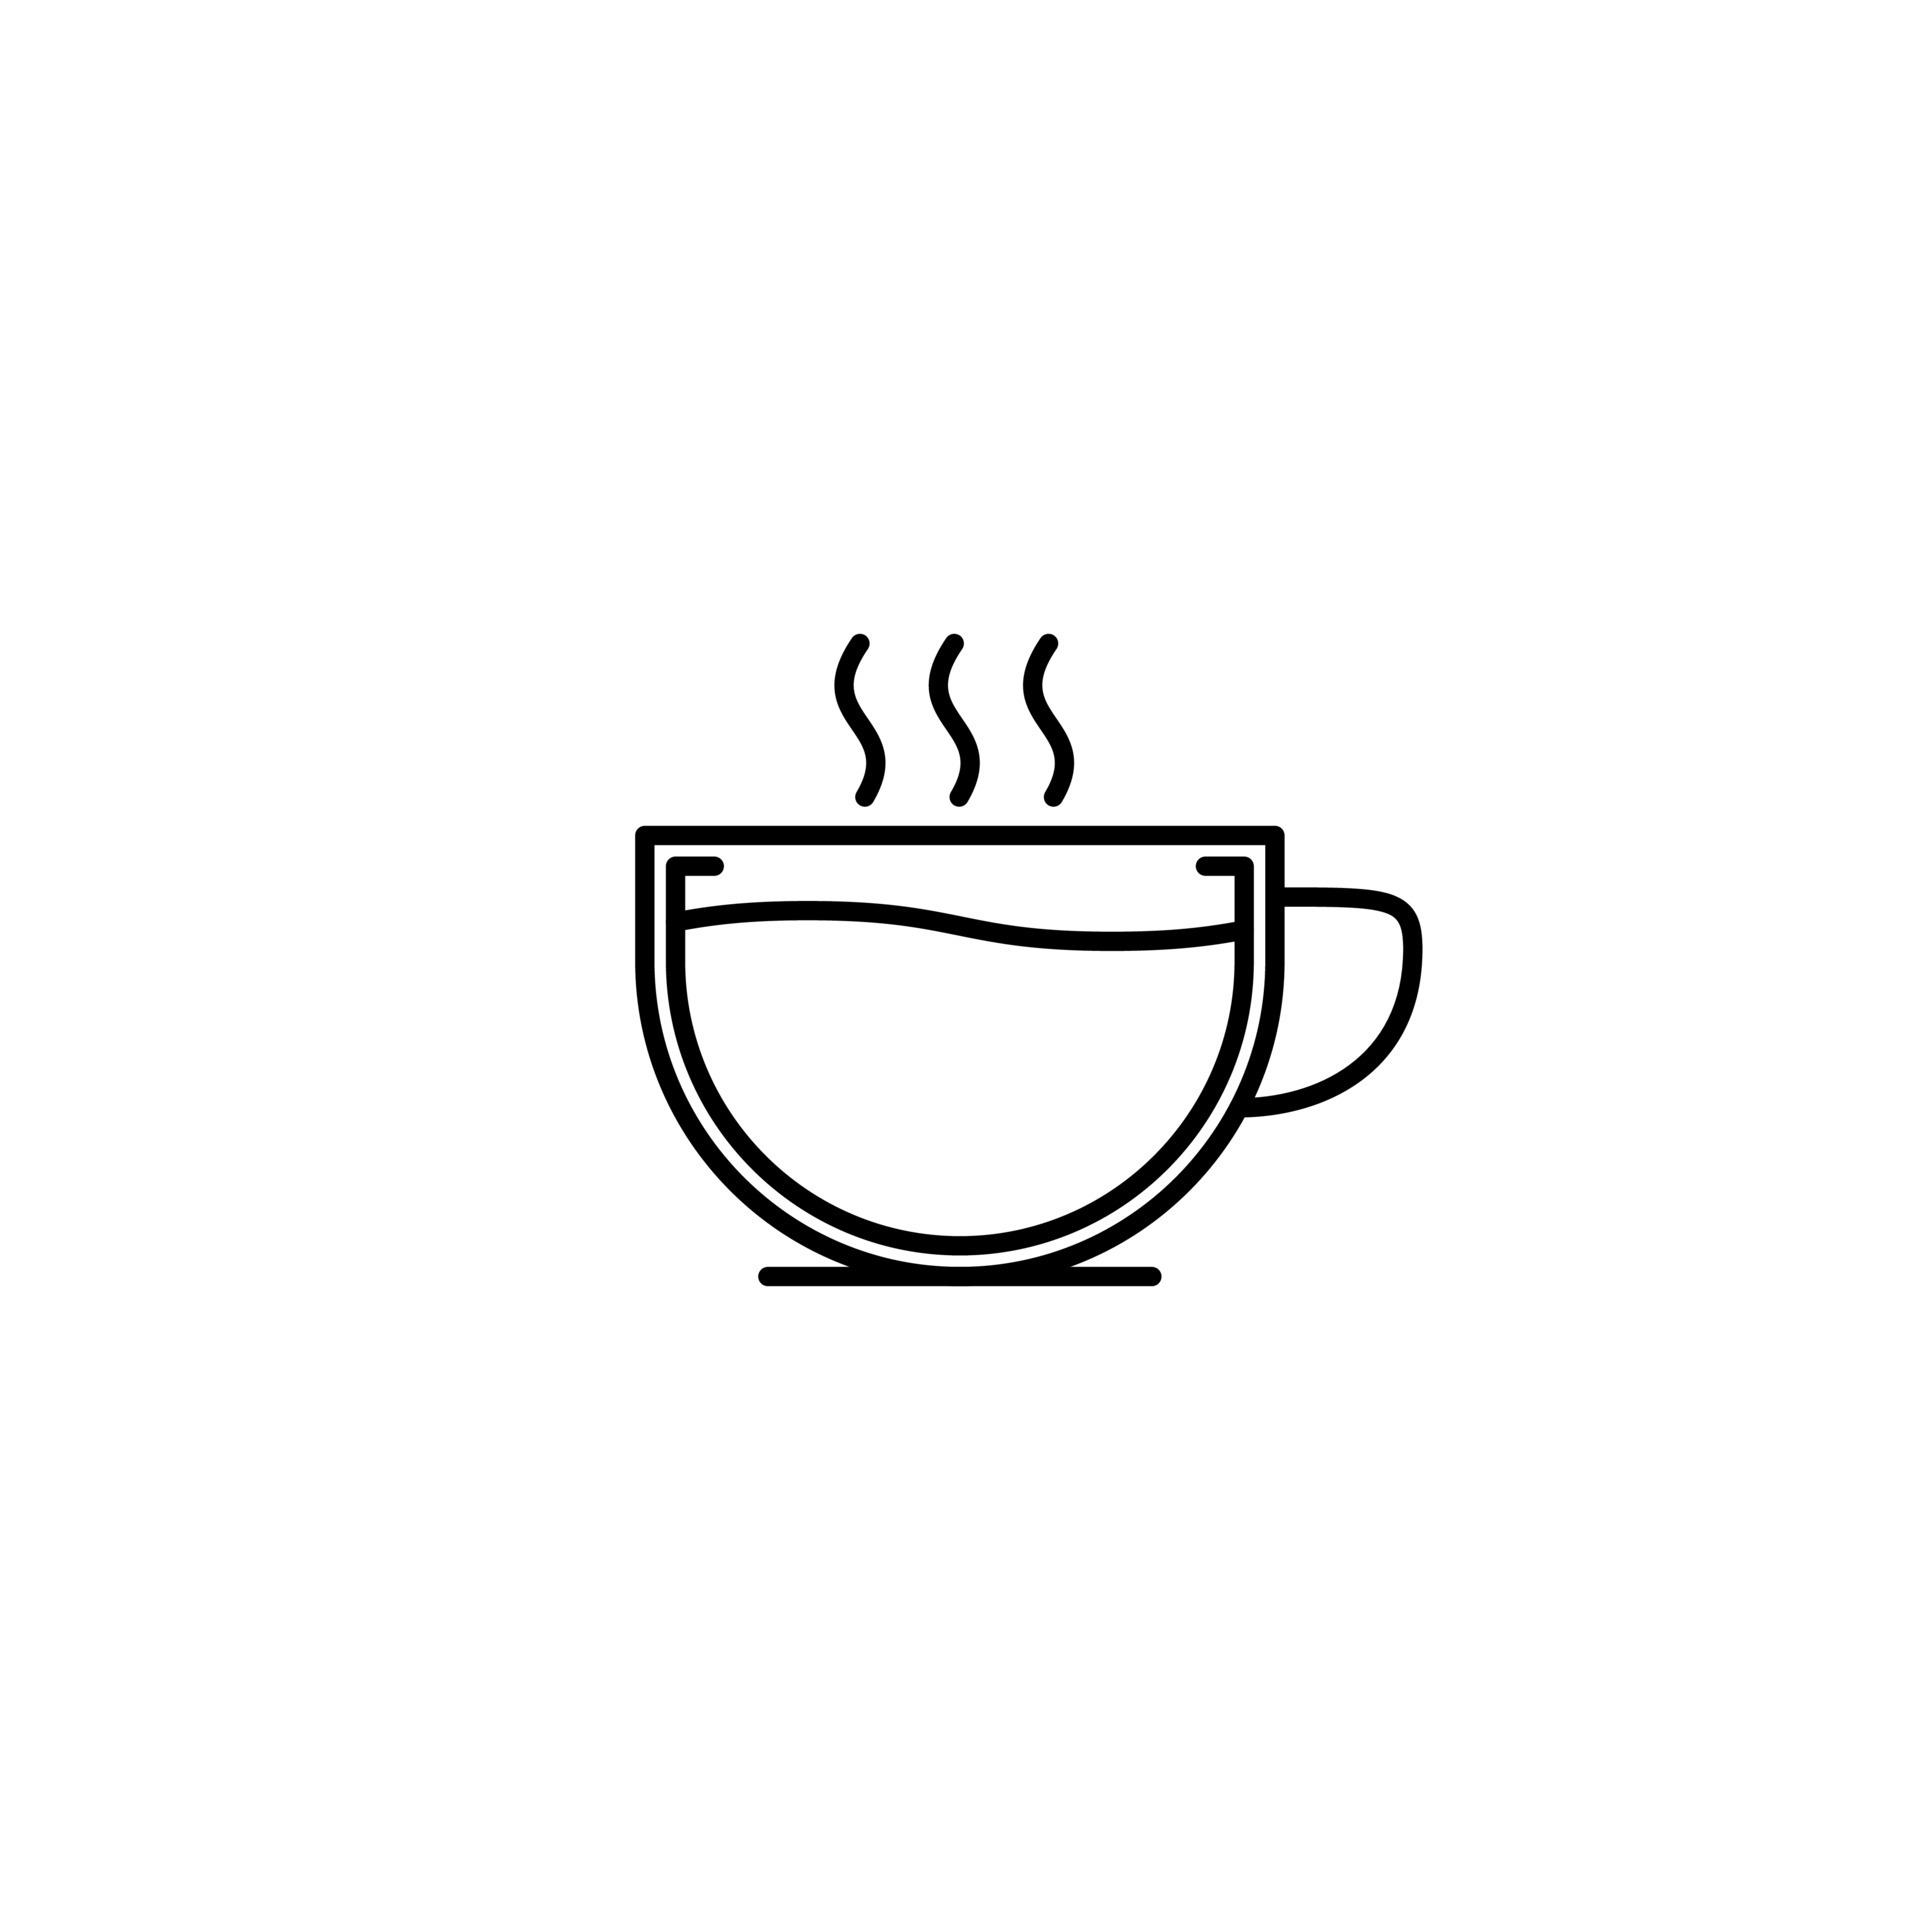 https://static.vecteezy.com/system/resources/previews/011/420/455/original/cup-icon-with-hot-water-on-white-background-simple-line-silhouette-and-clean-style-black-and-white-suitable-for-symbol-sign-icon-or-logo-free-vector.jpg